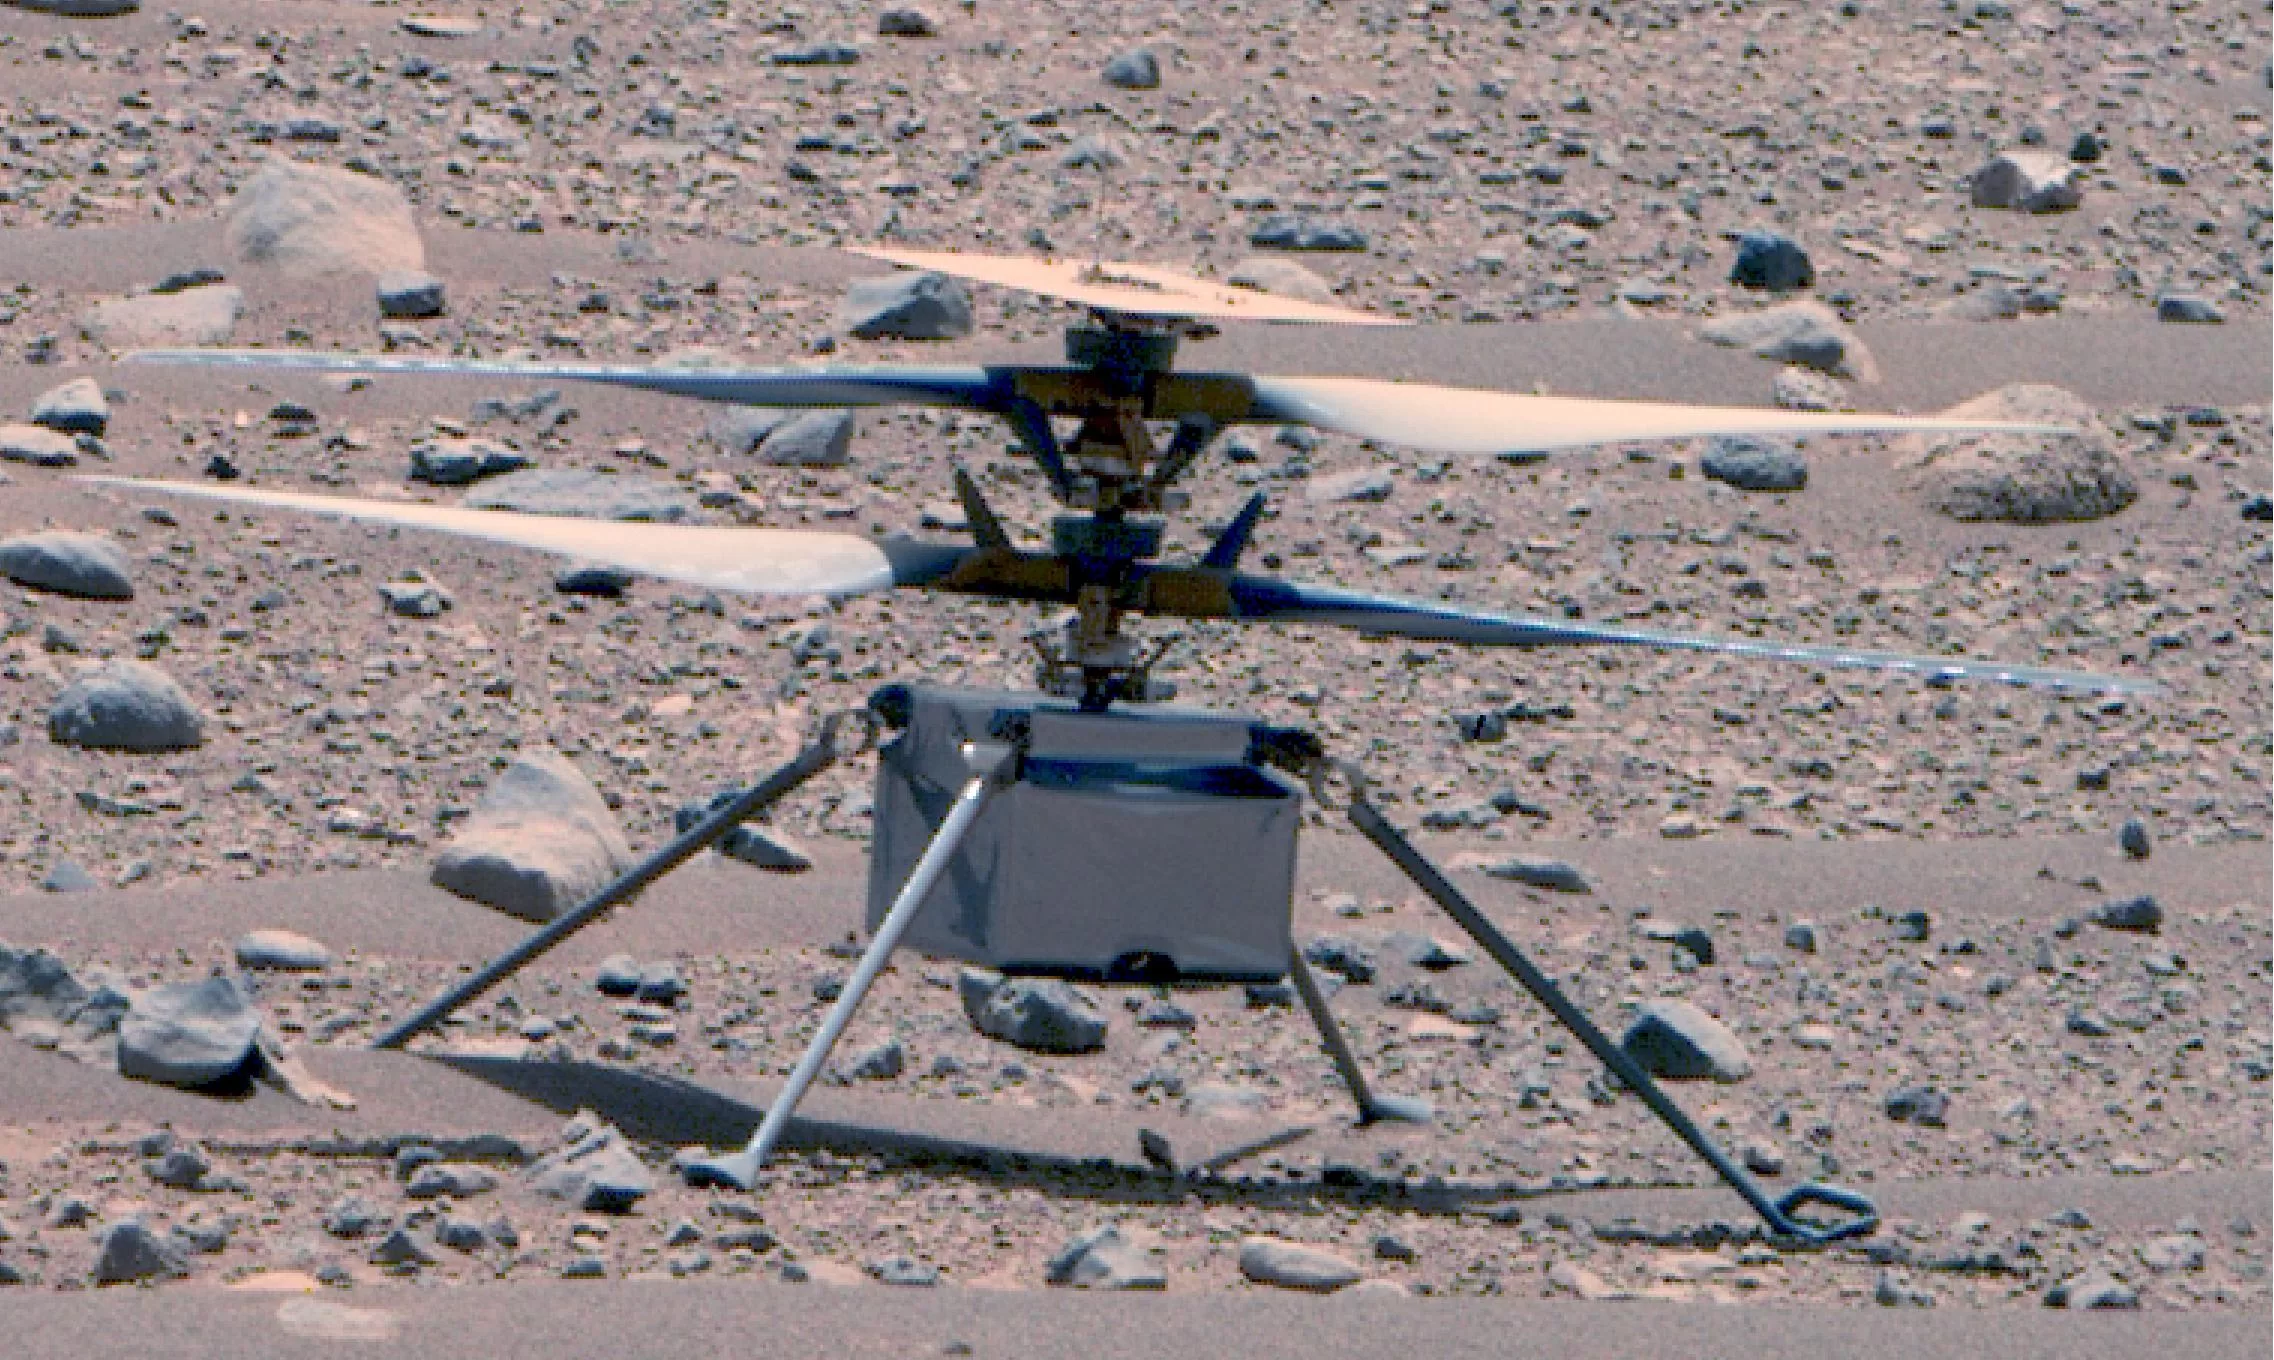 NASA’s Mars Helicopter Back in Touch After Months of Silence